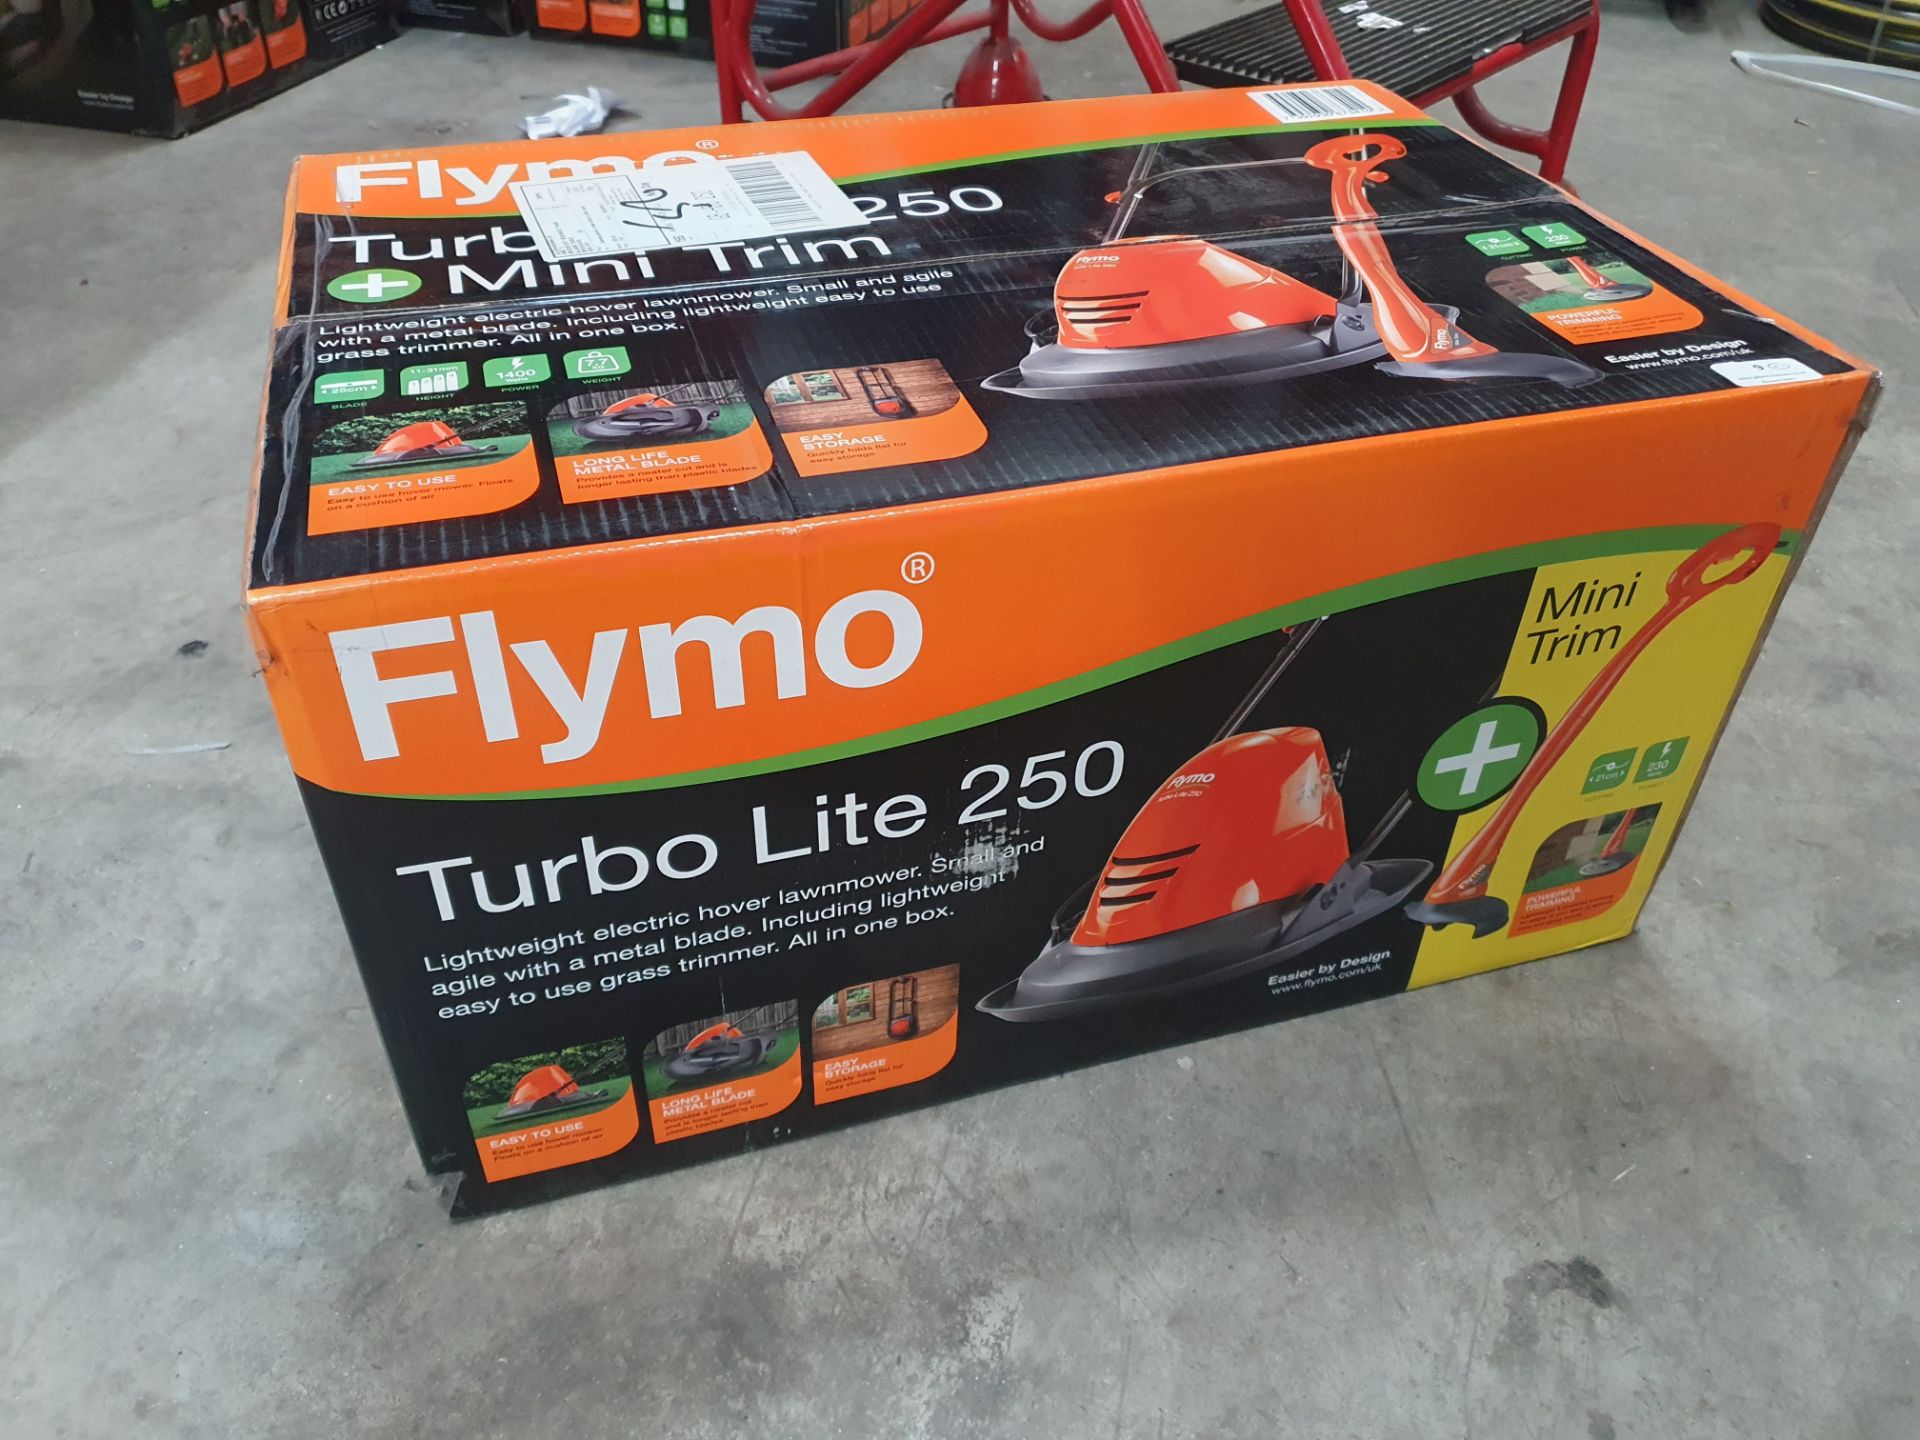 * Flymo Turbolite 250 lightweight electric hover mower and grass trimmer